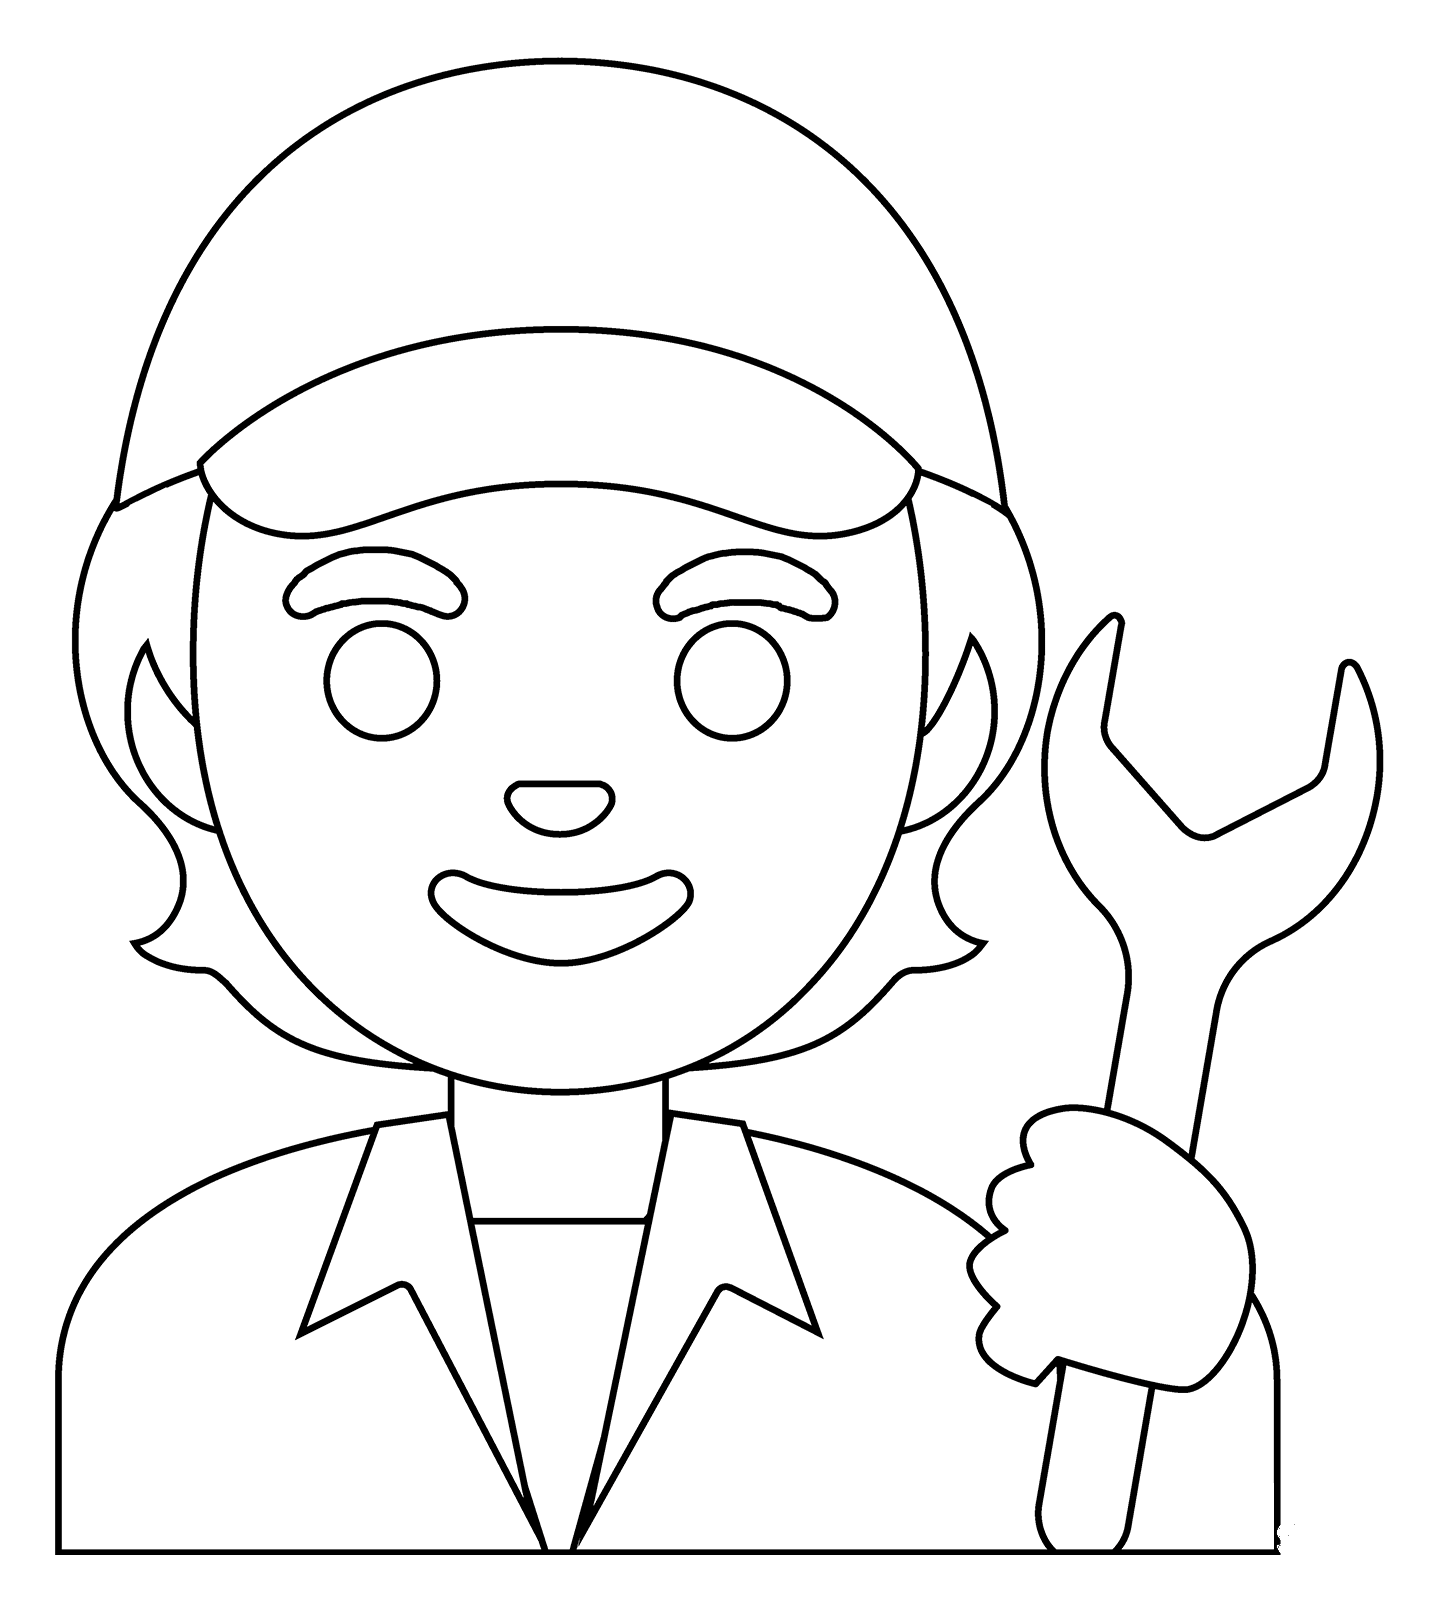 Mechanic Emoji coloring page - ColouringPages